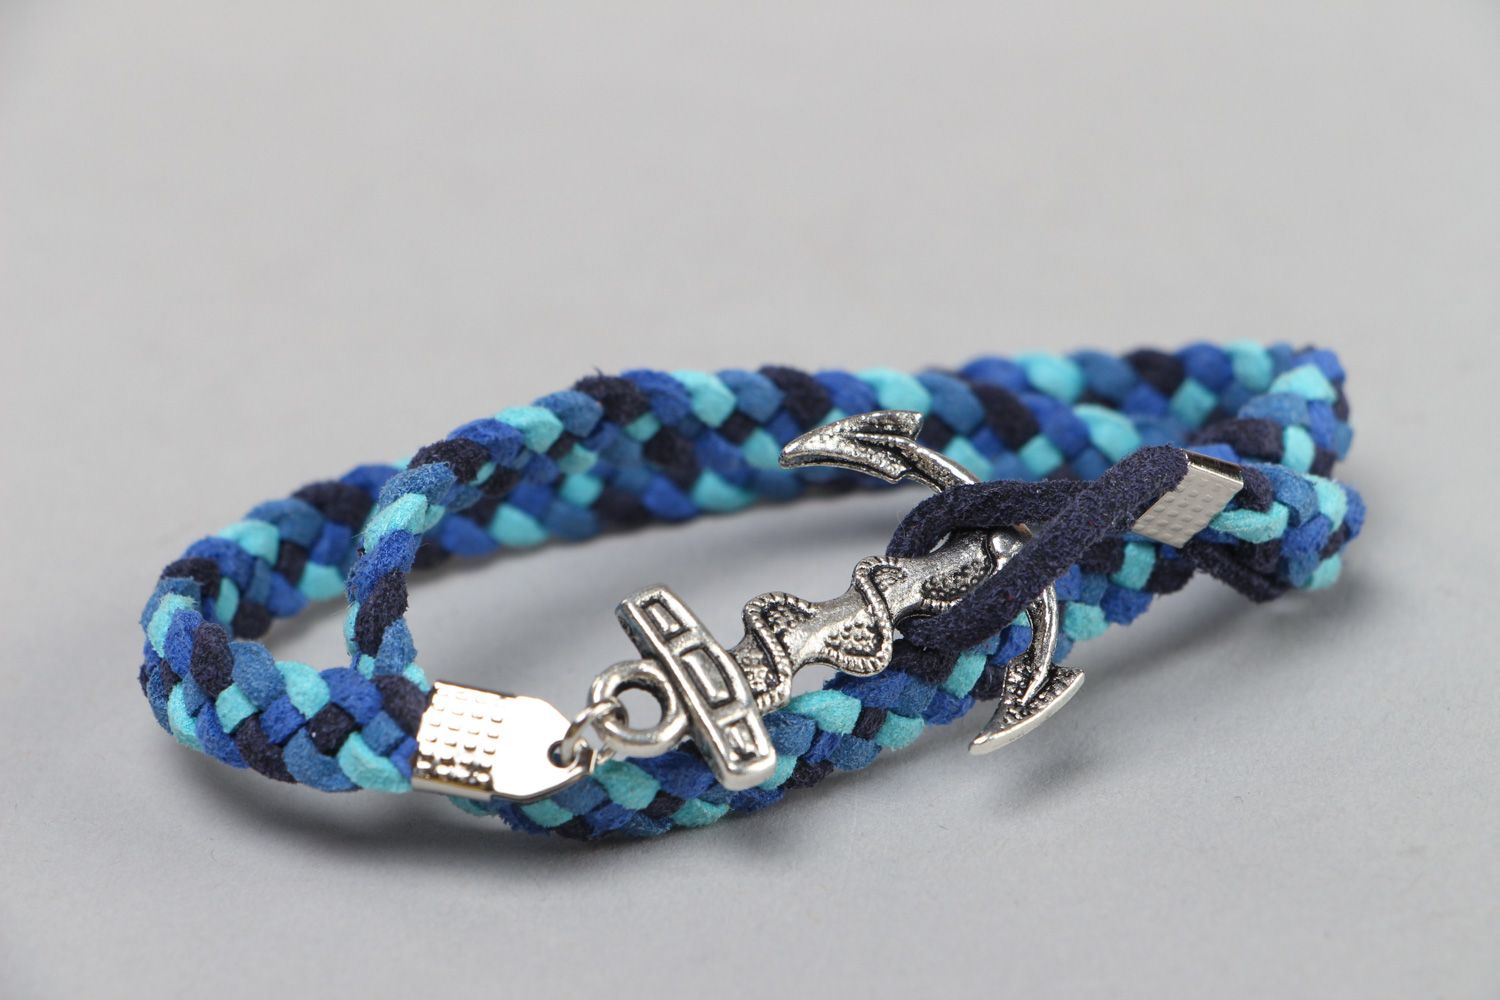 Handmade artificial leather marine charm bracelet in blue and dark blue colors photo 1